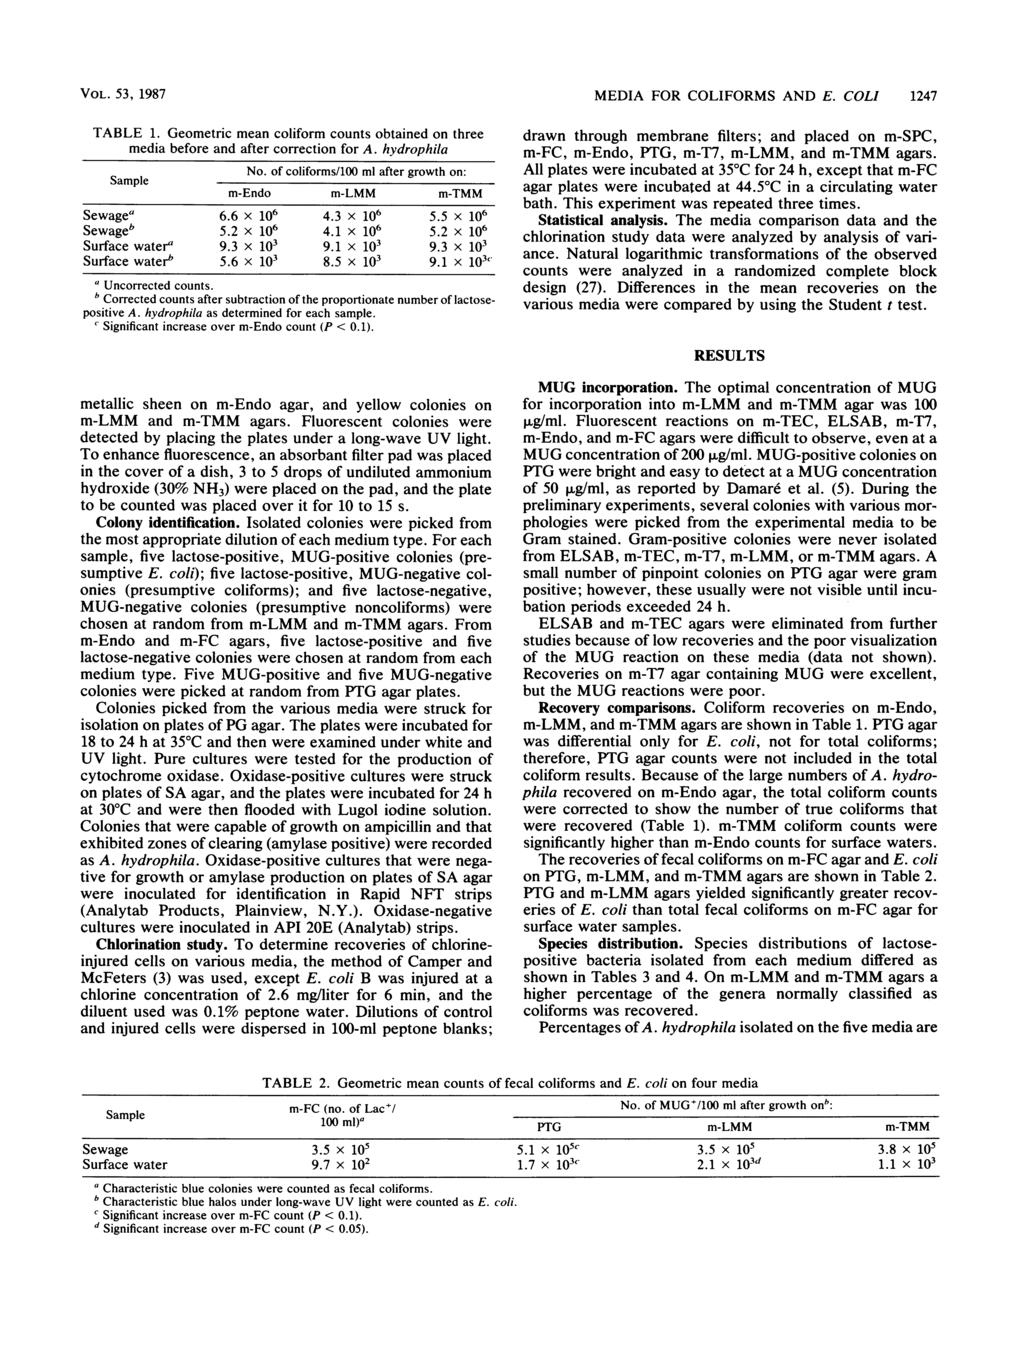 VOL. 53, 1987 TABLE 1. Geometric men coliform counts obtined on three medi before nd fter correction for A. hydrophil No. of coliforms/100 ml fter growth on: Smple m-endo m-lmm m-tmm Sewge' 6.